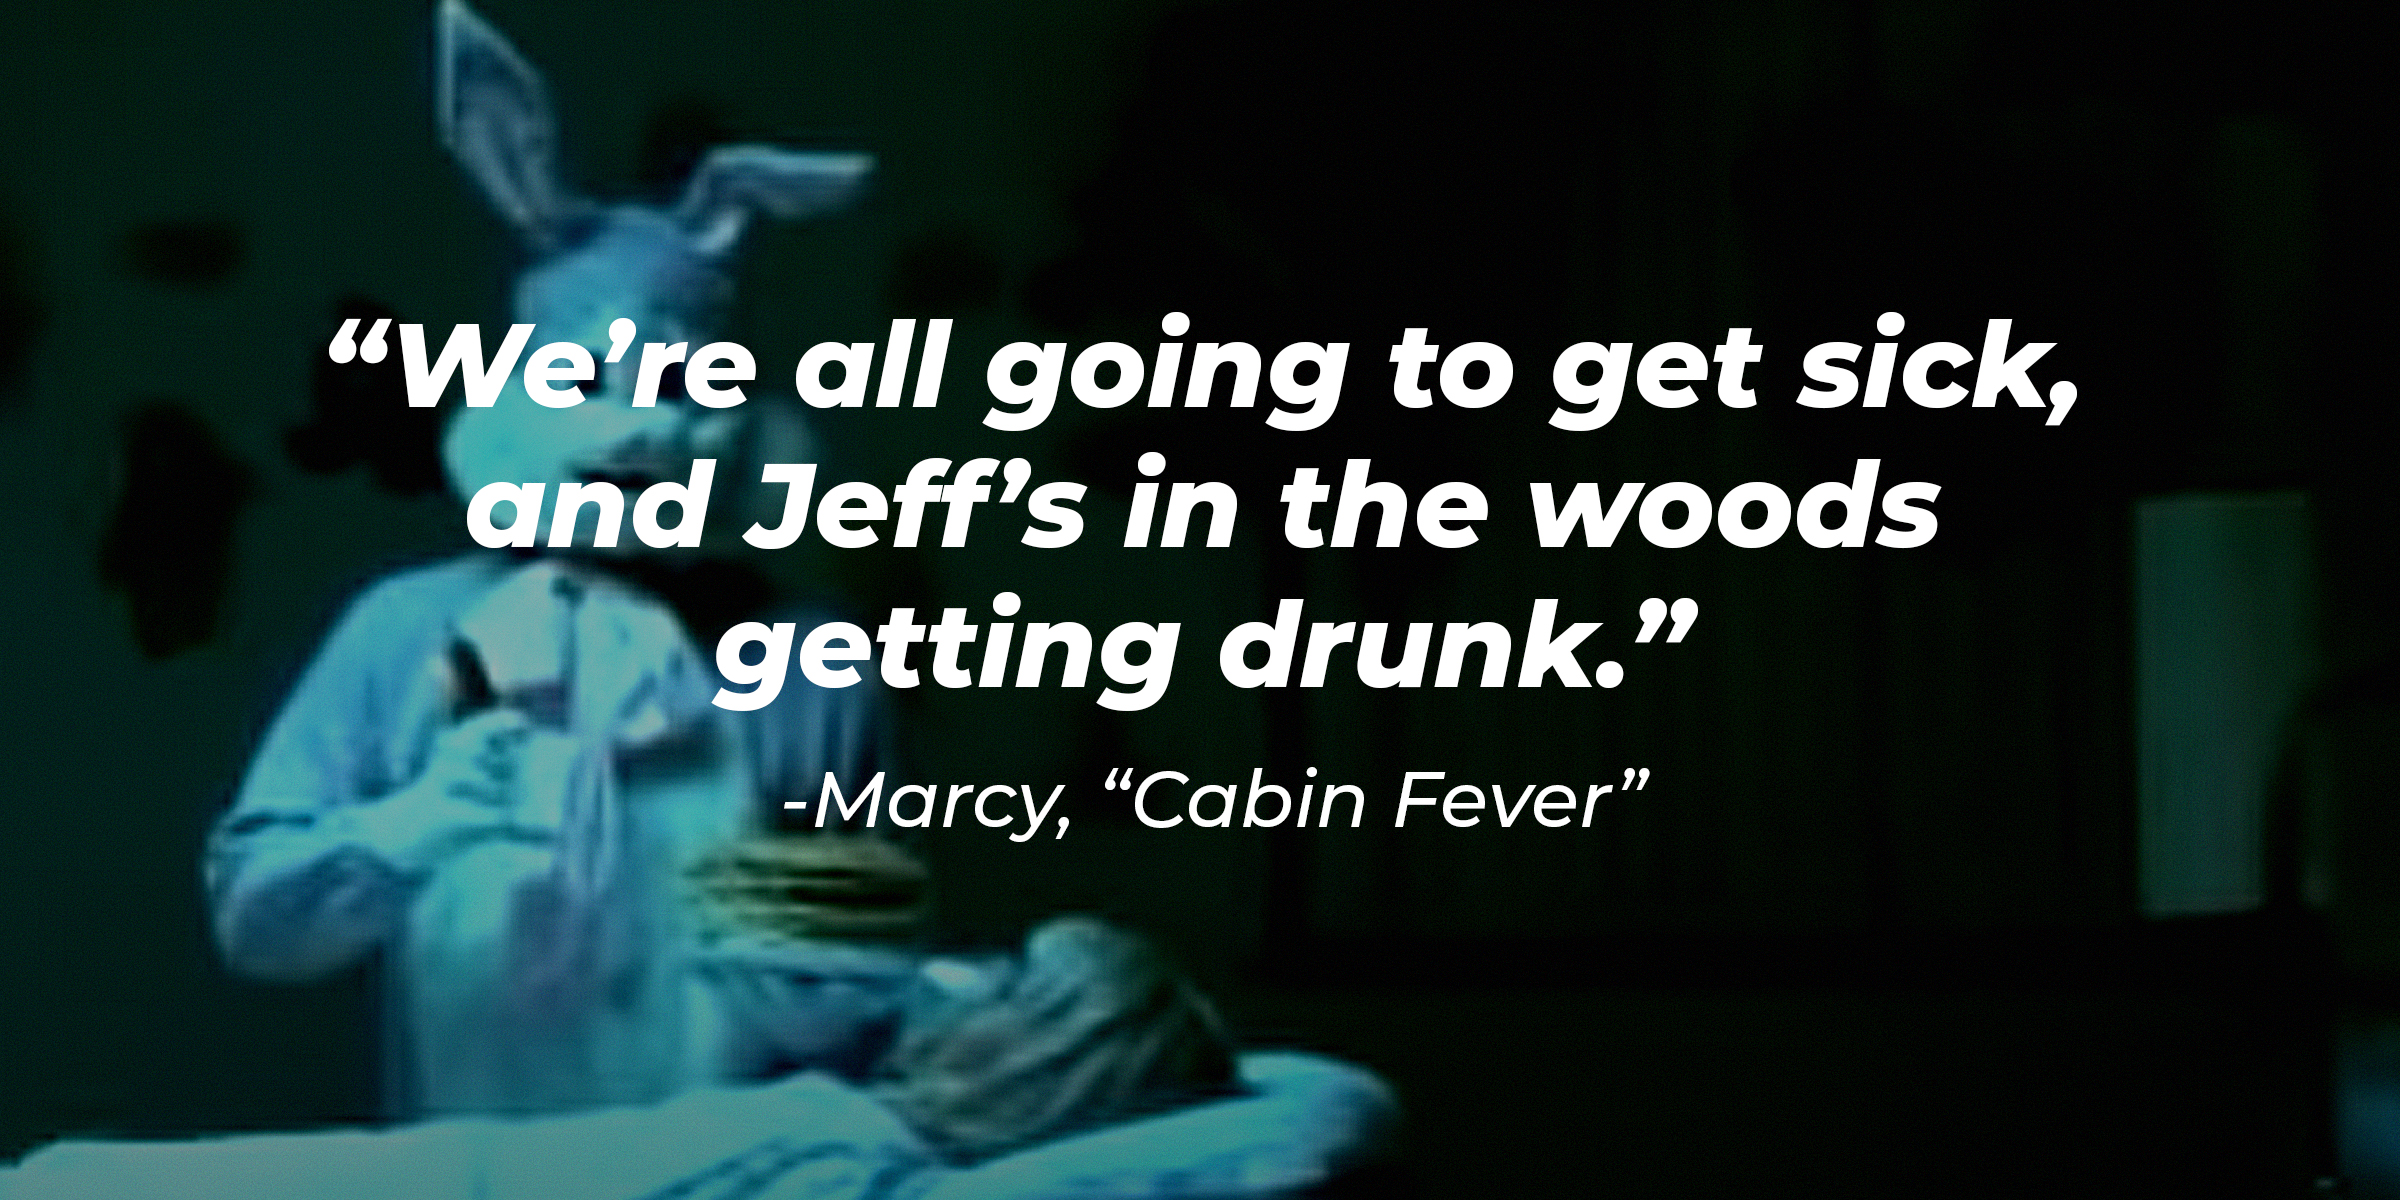 Marcy's quote from "Cabin Fever:" “We’re all going to get sick, and Jeff’s in the woods getting drunk.” | Source: Youtube.com/LionsgateMovies